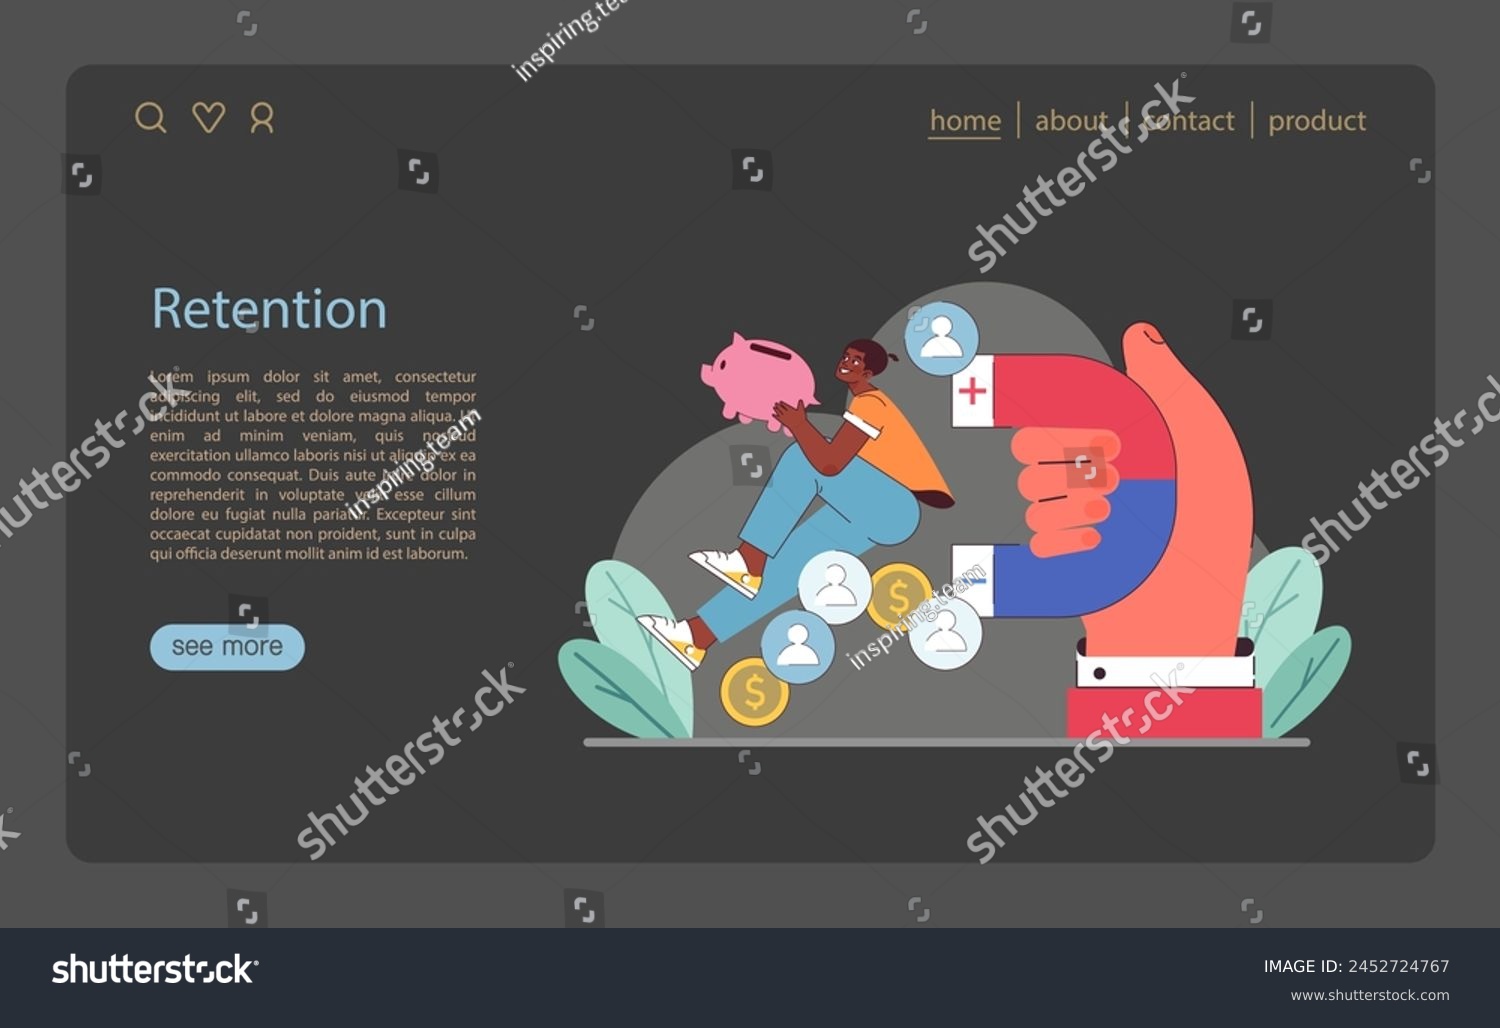 SVG of Customer retention concept. Depicts saving strategy, client satisfaction, and loyalty programs as key to sustaining market presence. Essential for niche marketing. Flat vector illustration. svg